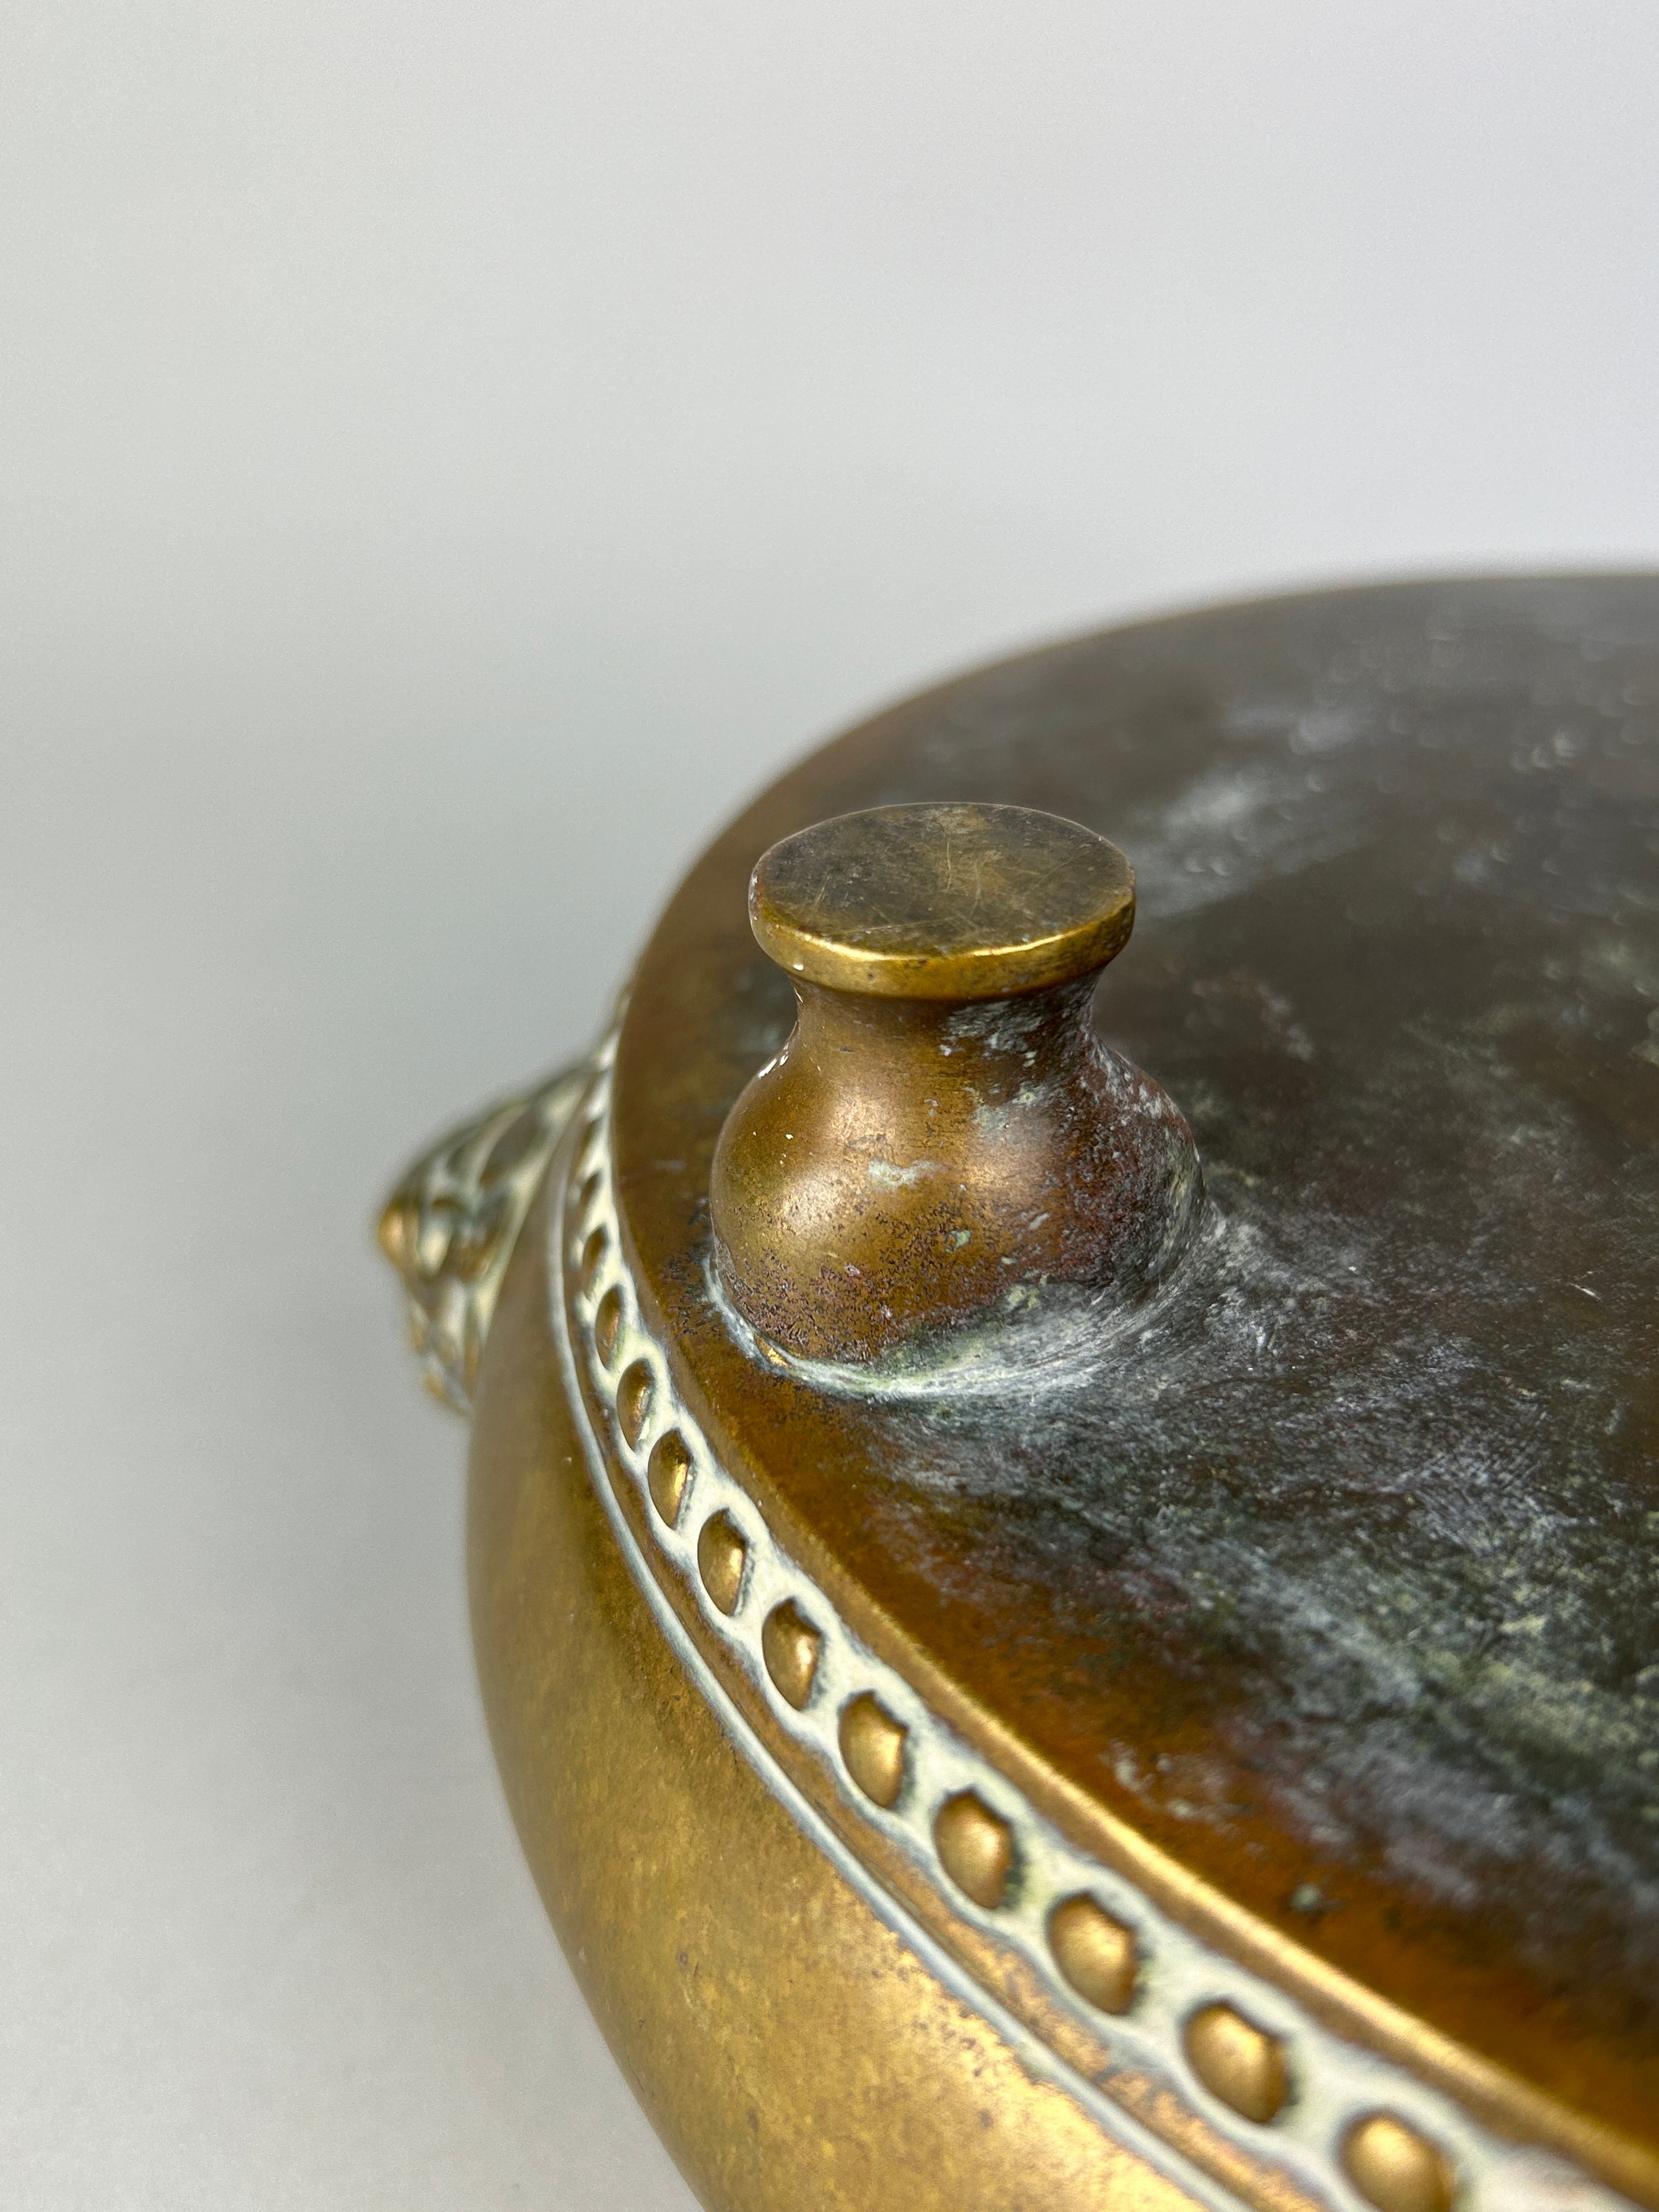 AN 18TH OR 19TH CENTURY CHINESE BRONZE CENSER WITH LION HEAD HANDLES ON TRIPOD FEET, 29cm W x 9cm H - Image 9 of 10